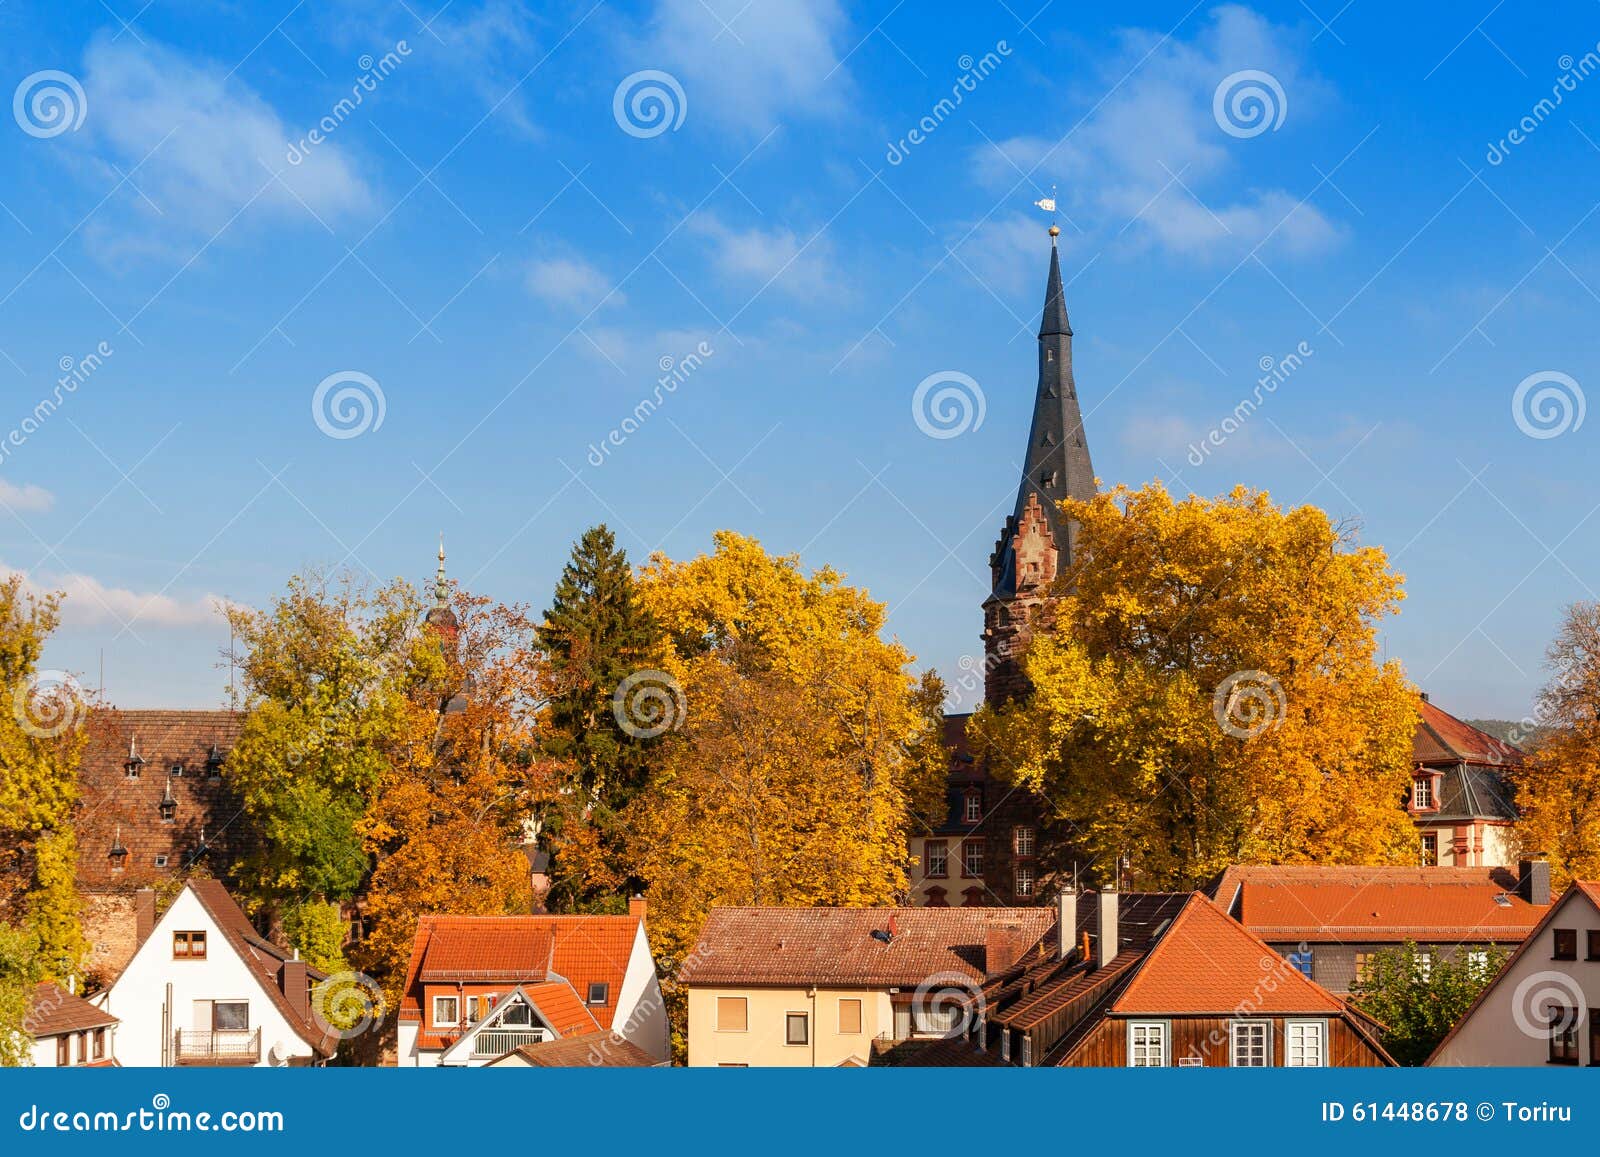 Beautiful Autumn Colors In The Old Town Stock Photo - Image of germany